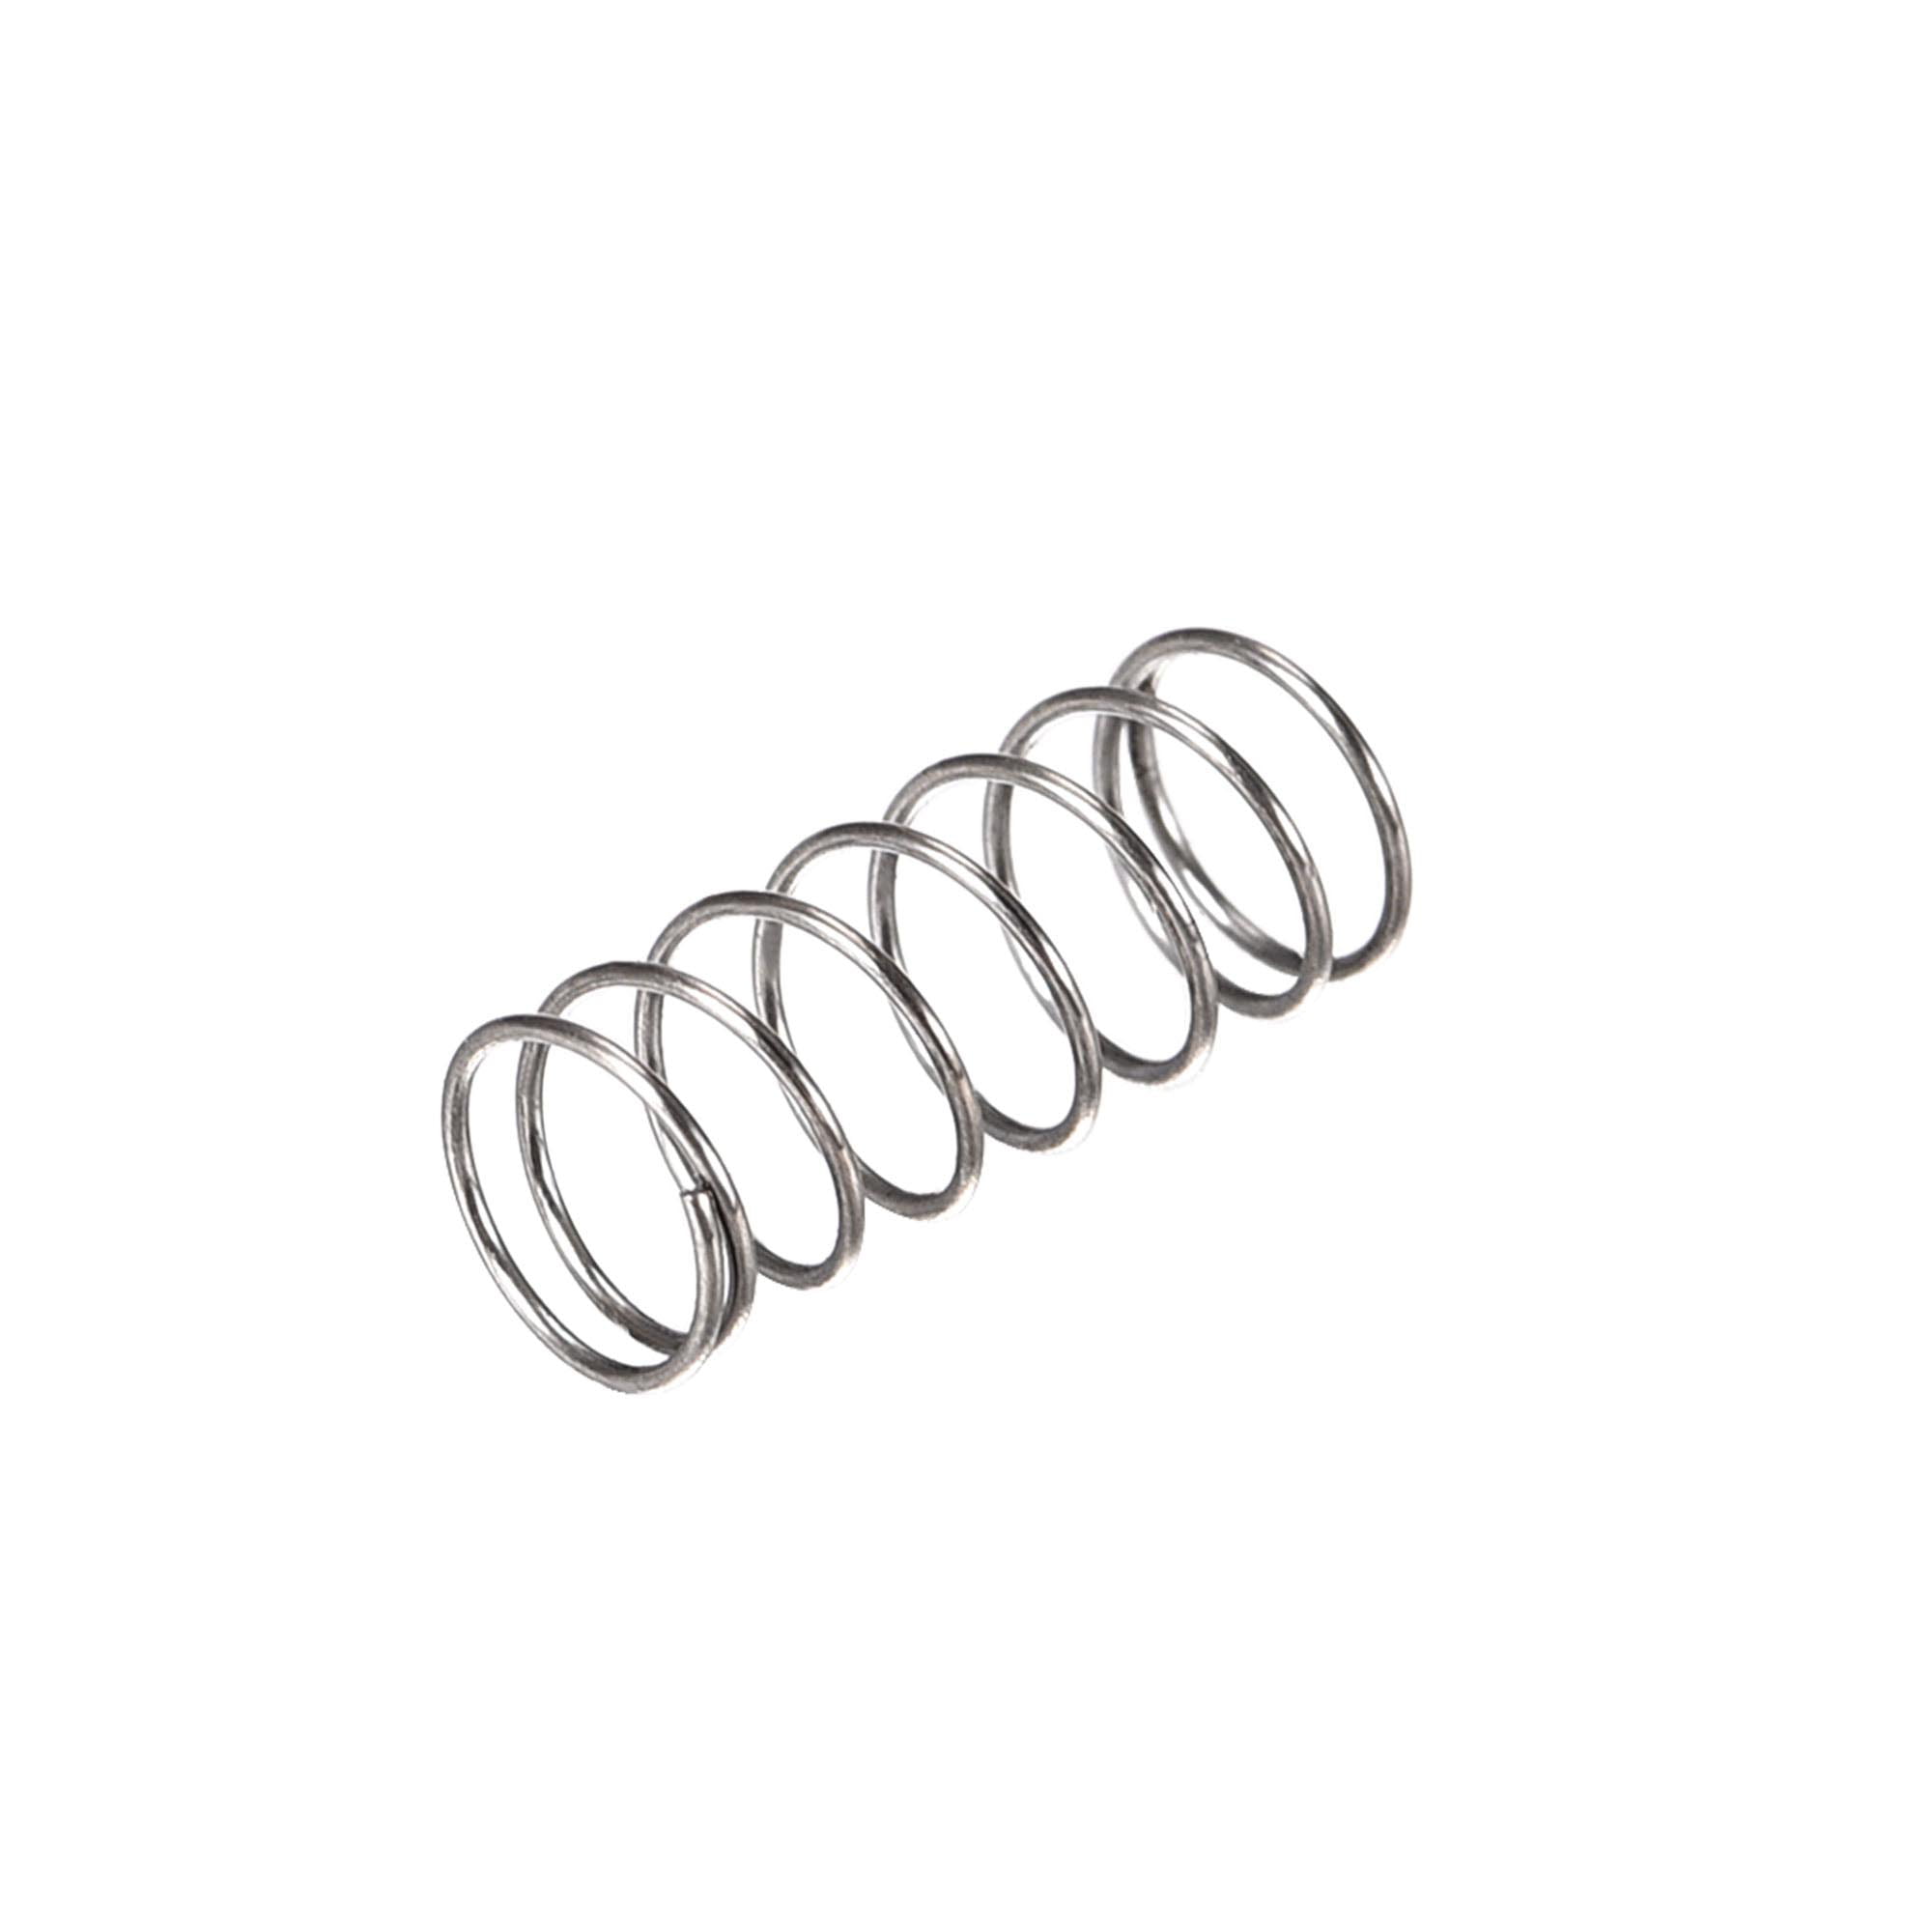 Wire Dia 0.3mm Tension Extending Springs Expansion Spring Length Size Choose 